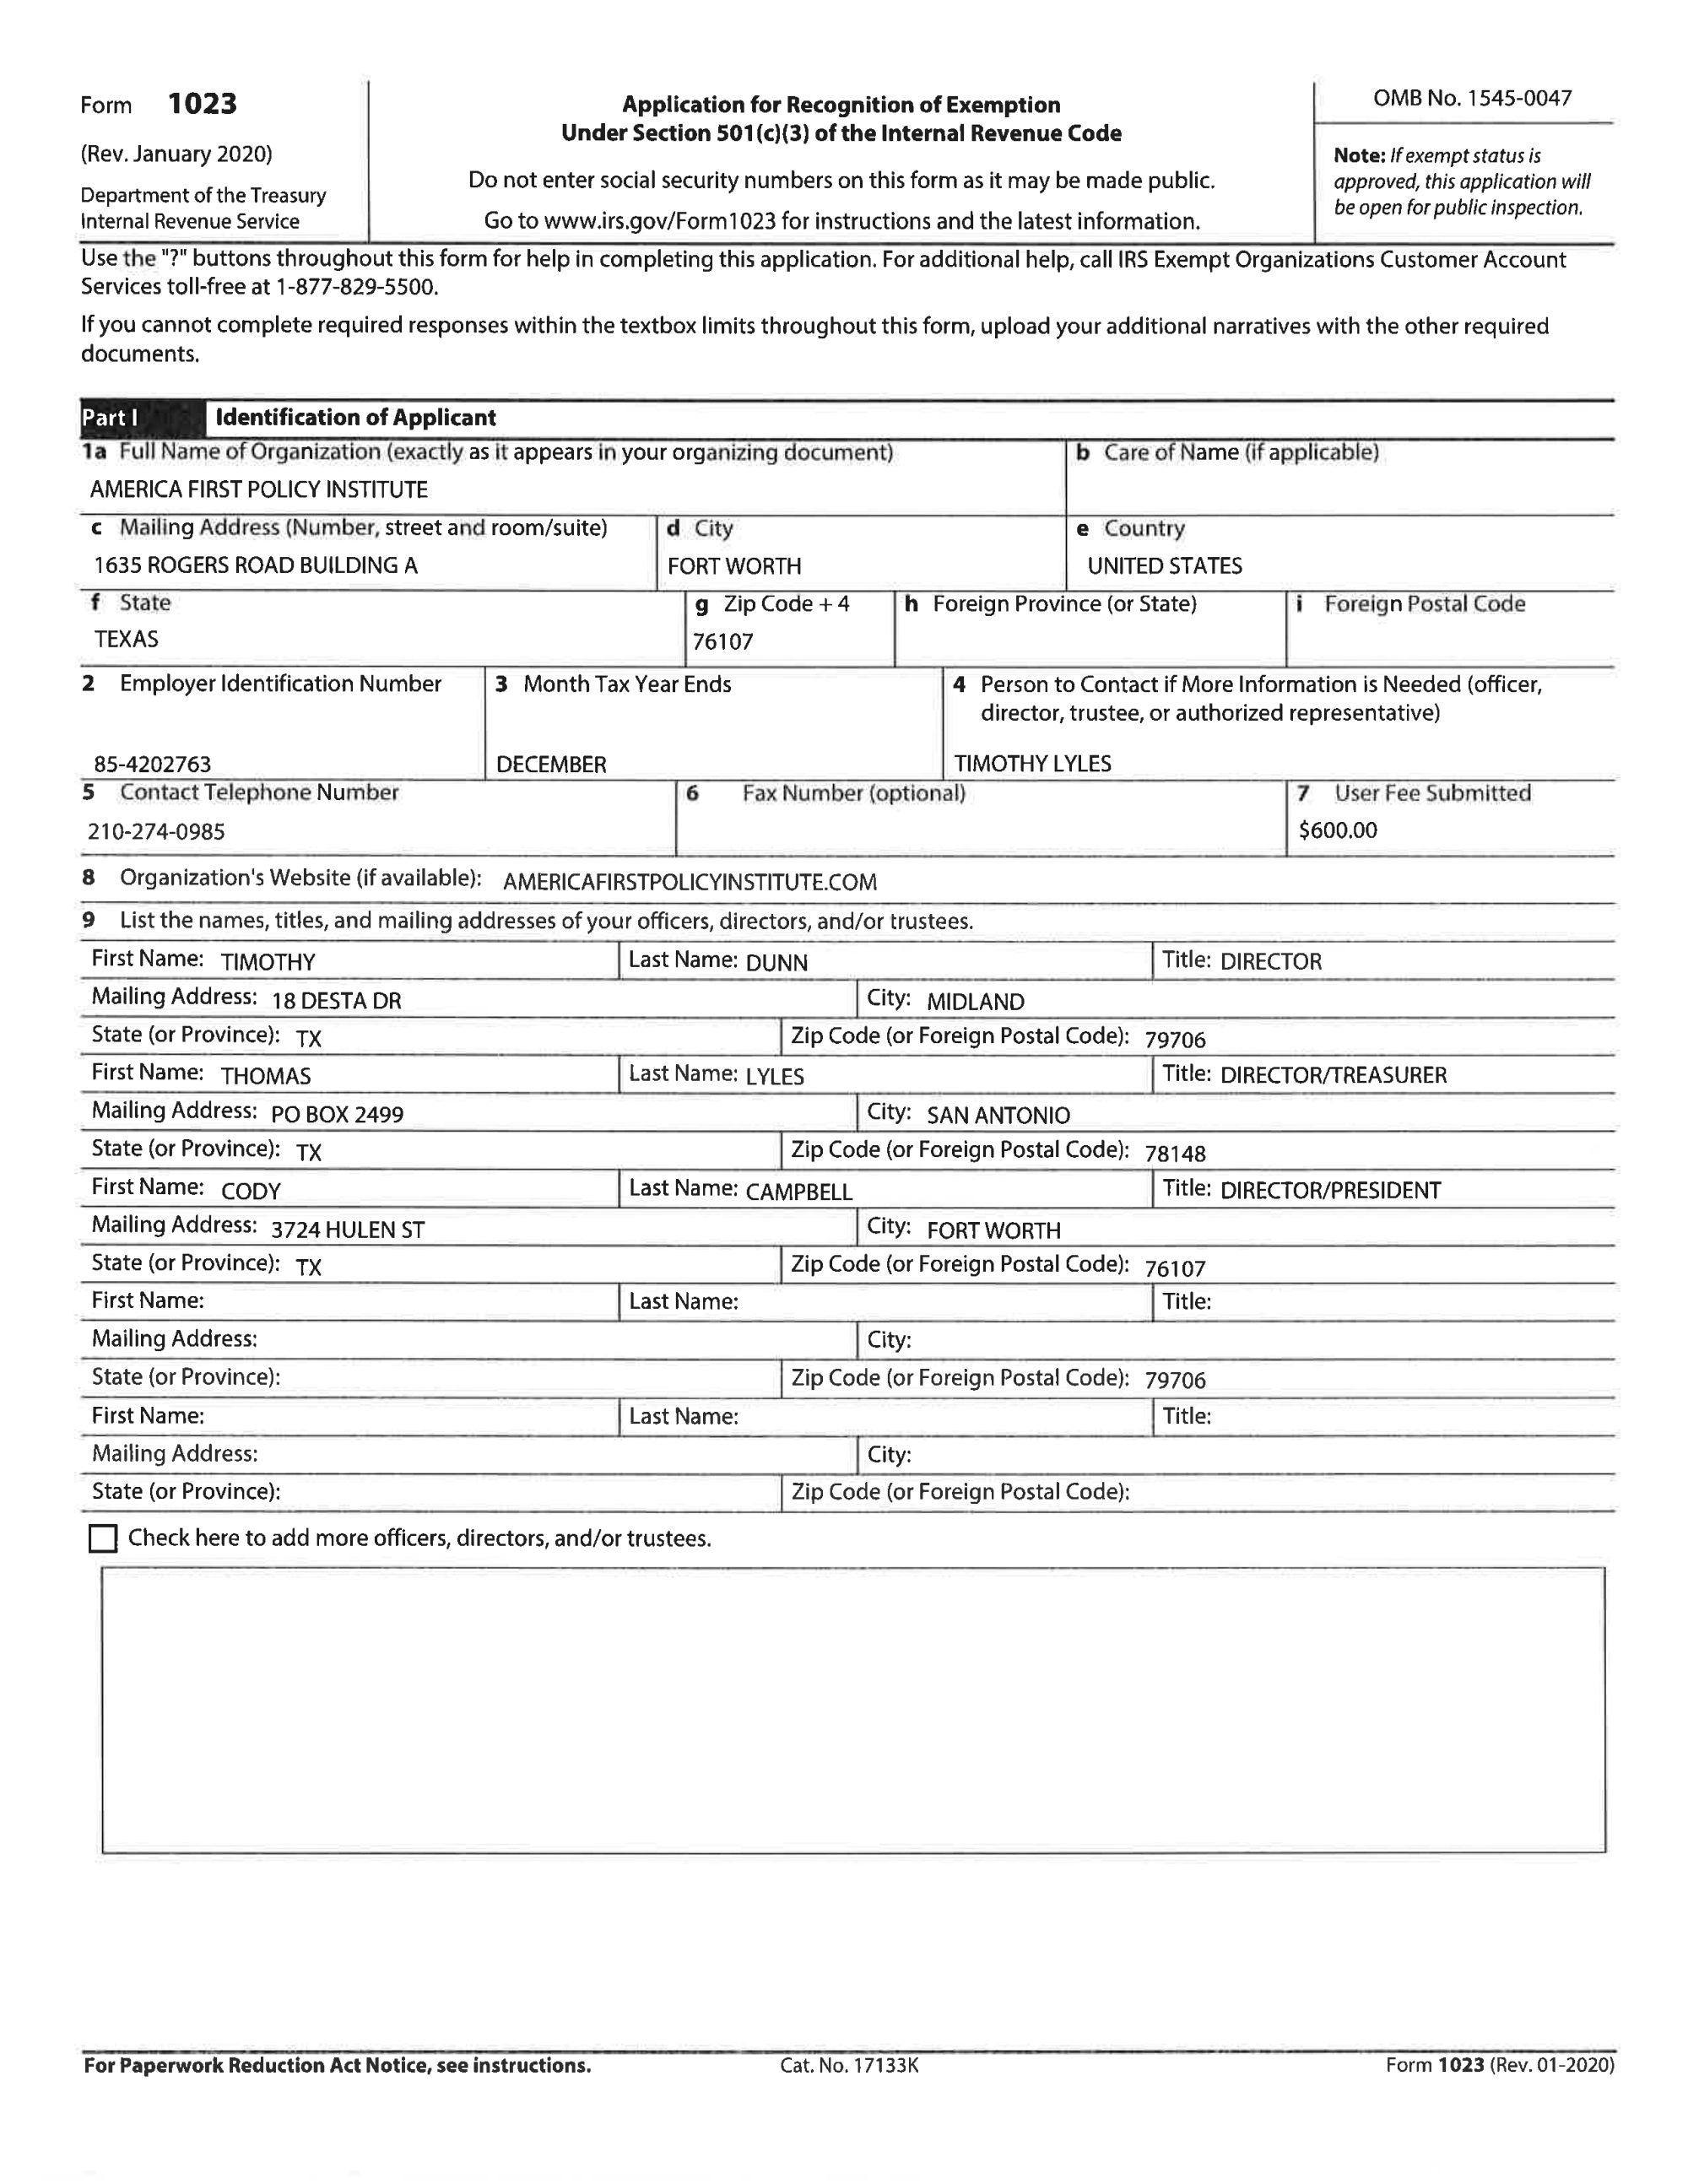 Page 1 of America First Policy Institute 1023 Tax-Exempt Application